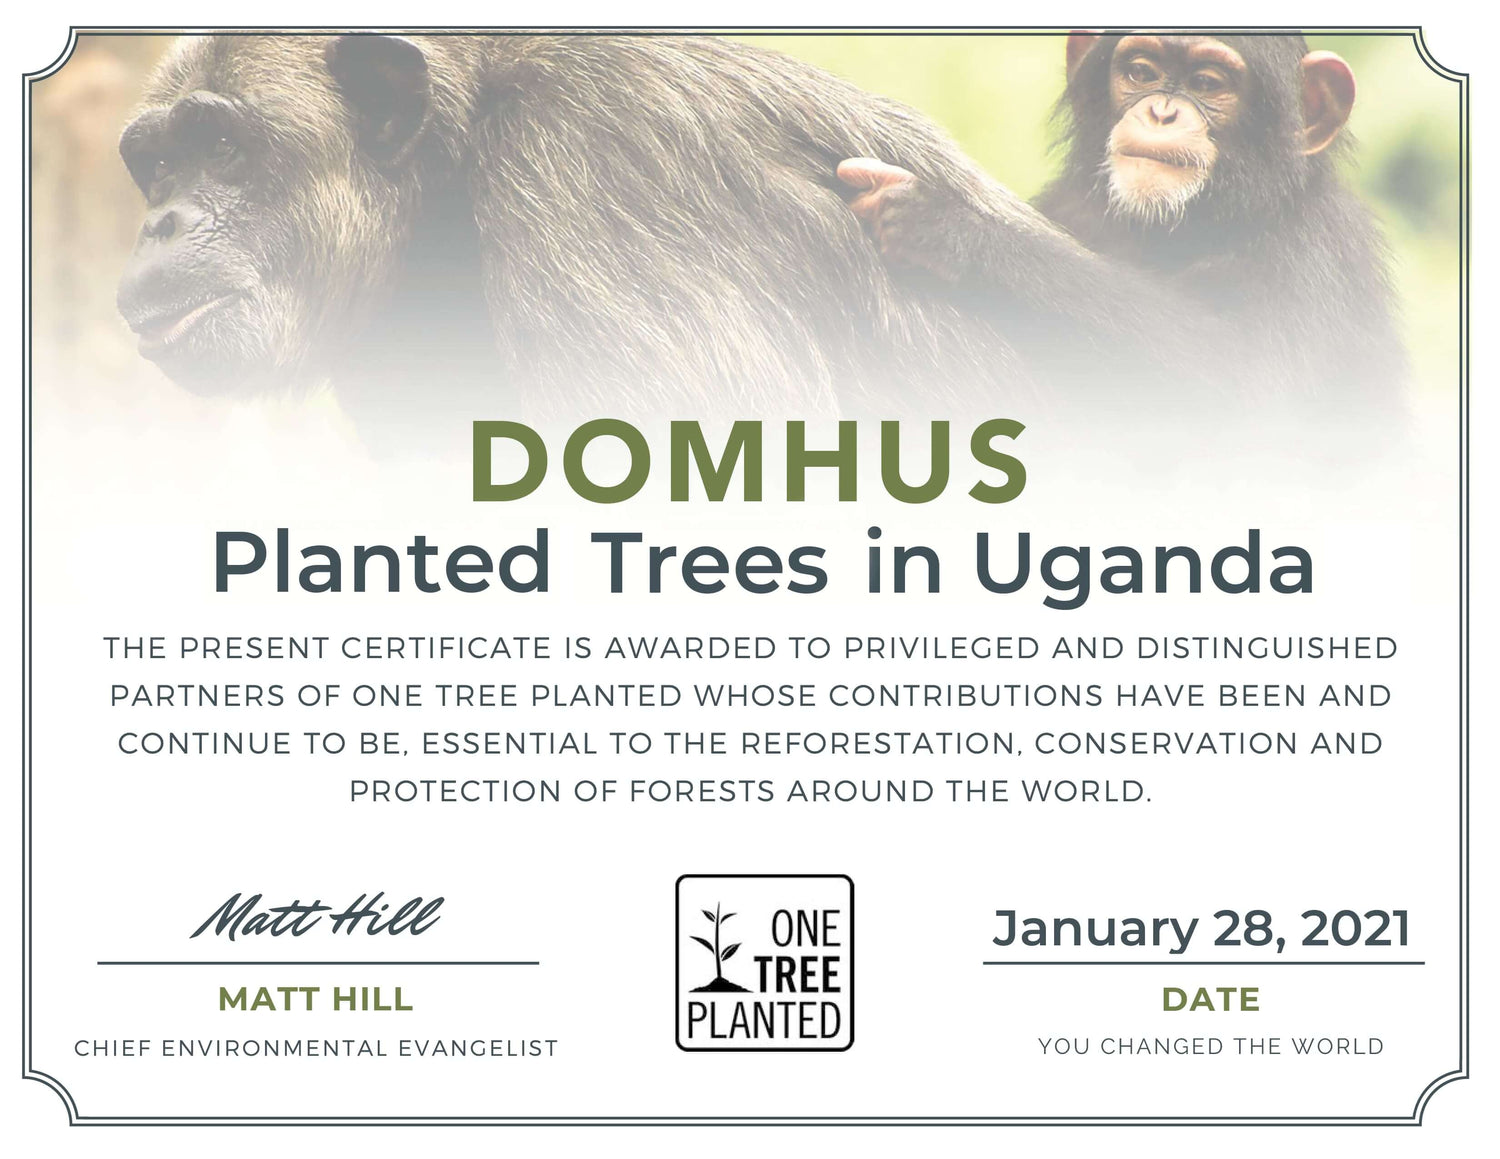 domhus reforestation partner certificate by one tree planted for planting trees in Uganda